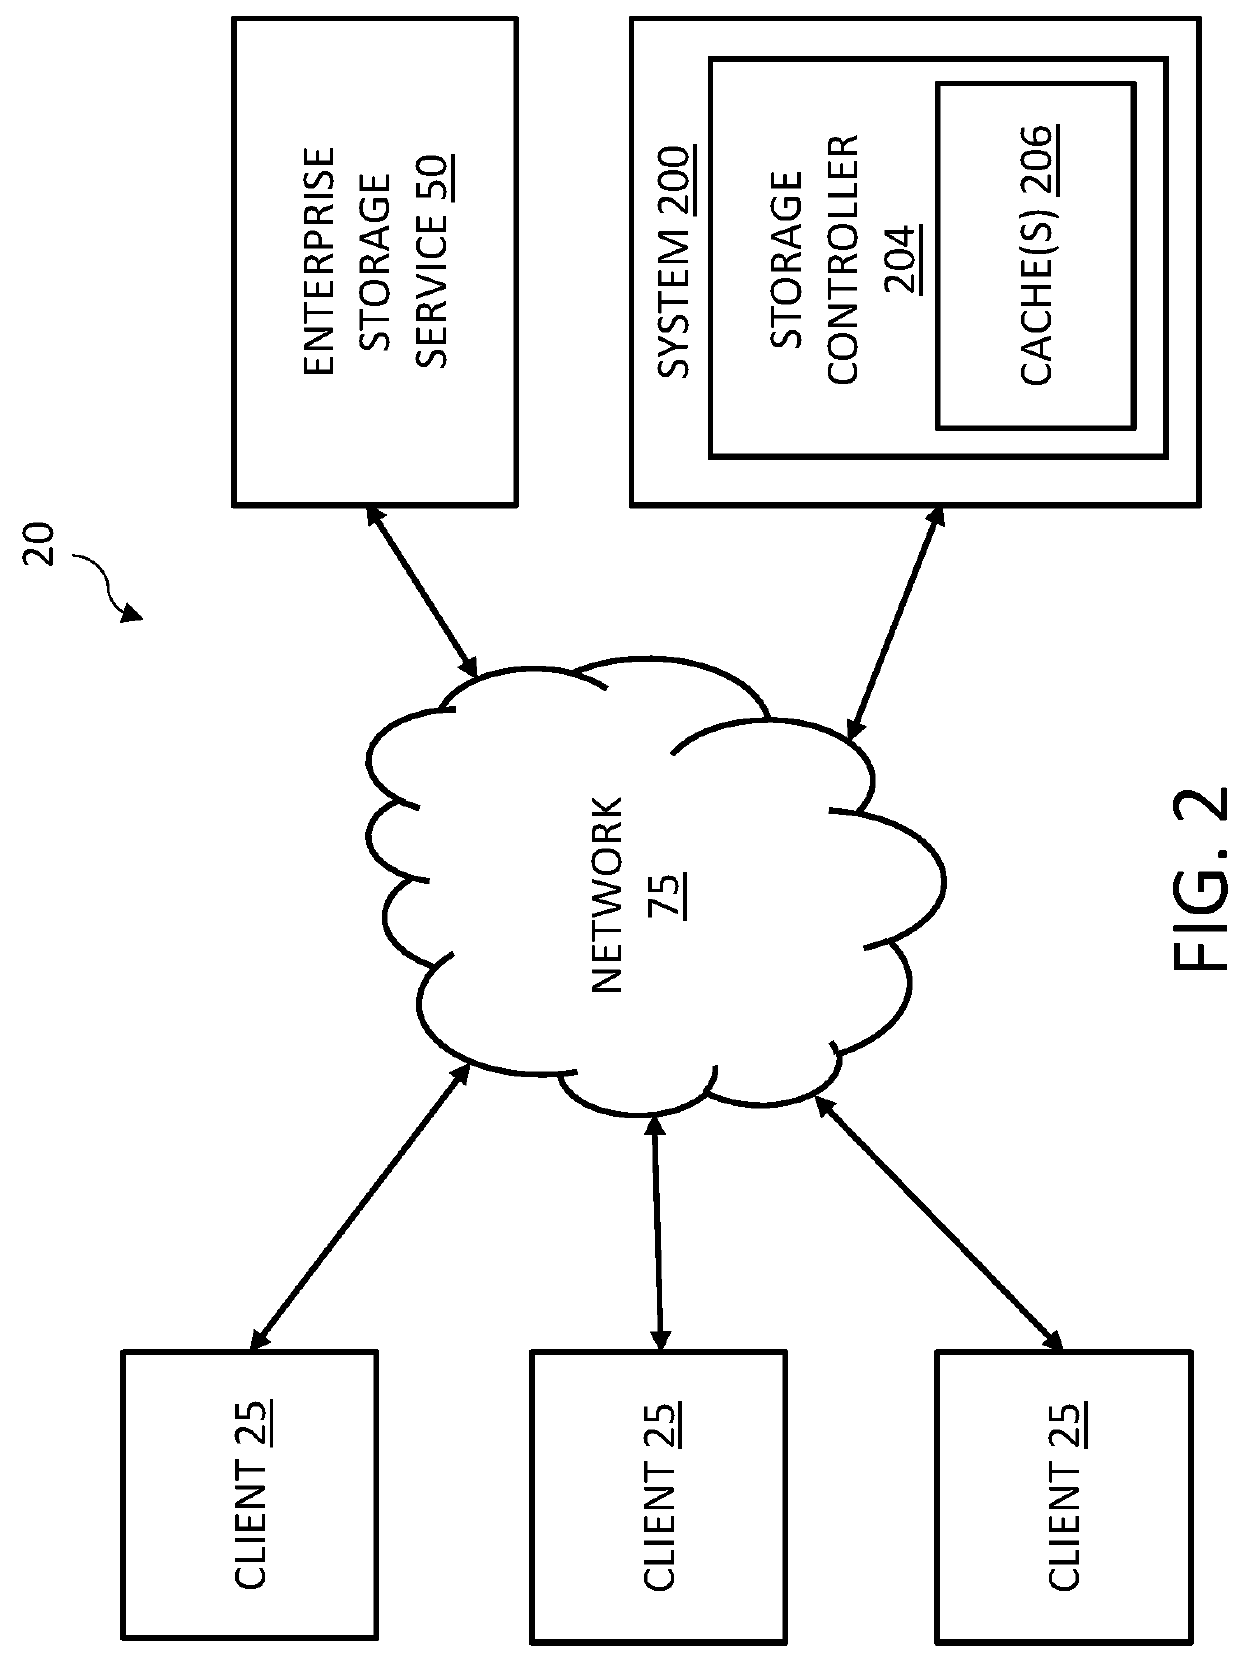 Managing I/O Operations for Data Objects in a Storage System